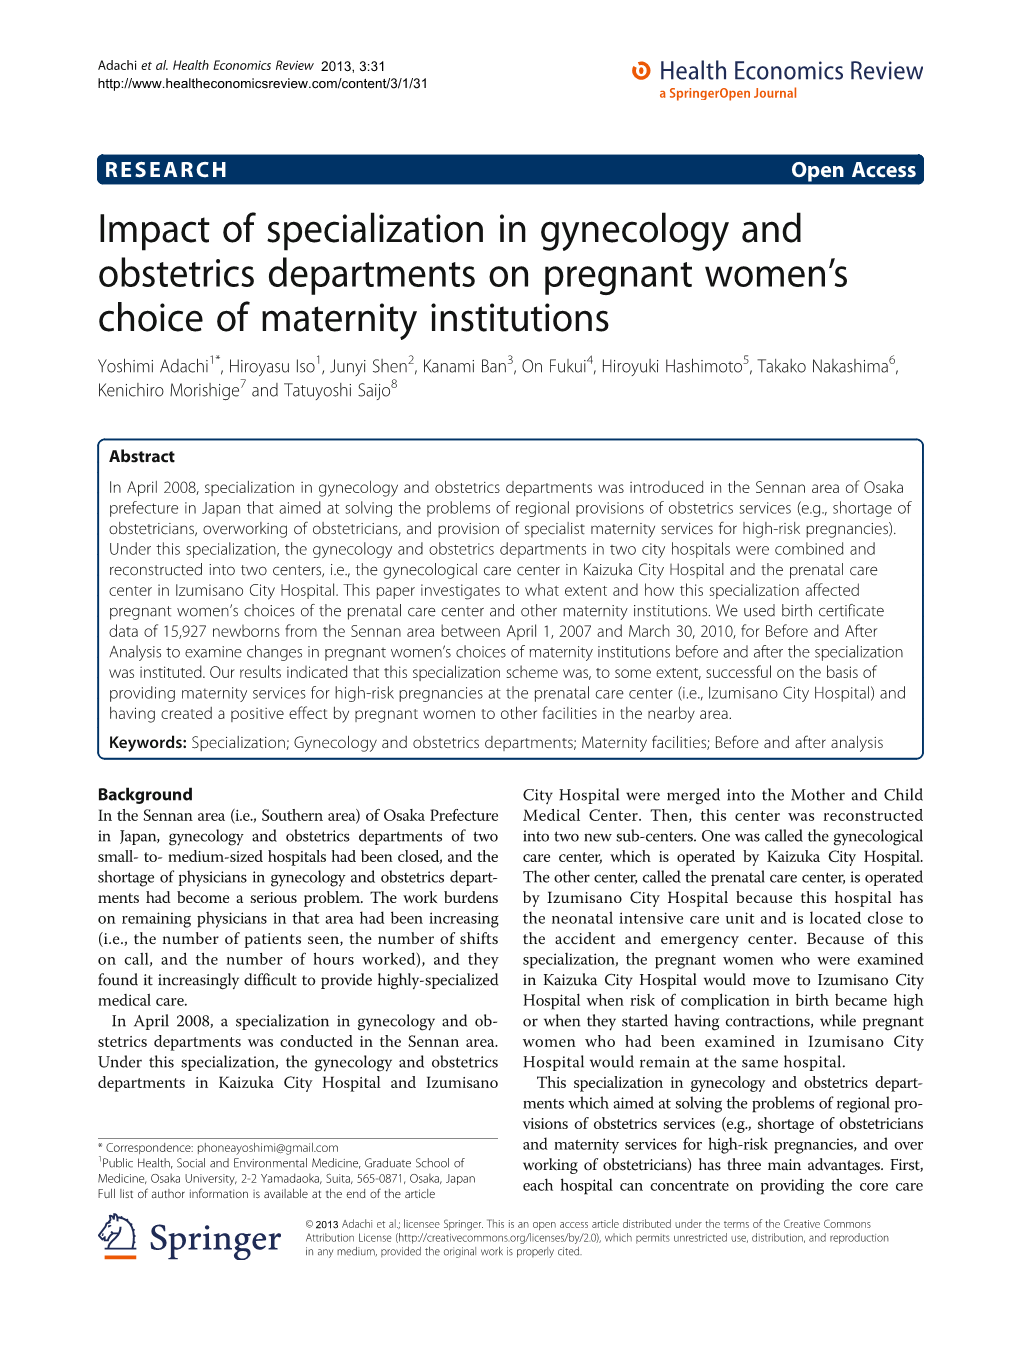 Impact of Specialization in Gynecology and Obstetrics Departments On